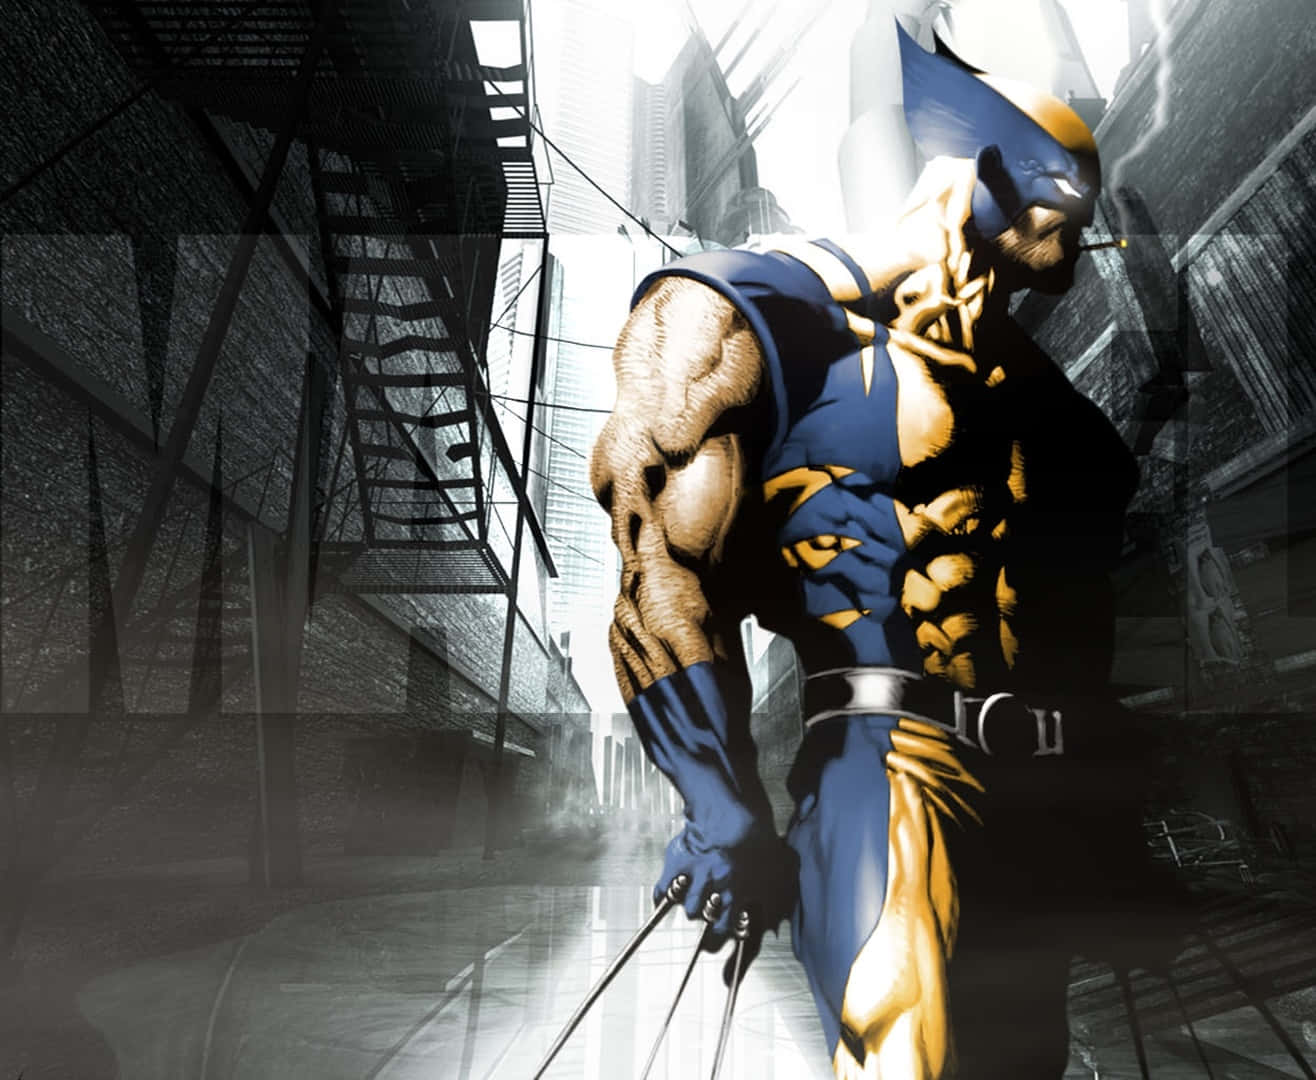 Get Ready To Enter The Twisted World Of Wolverine!